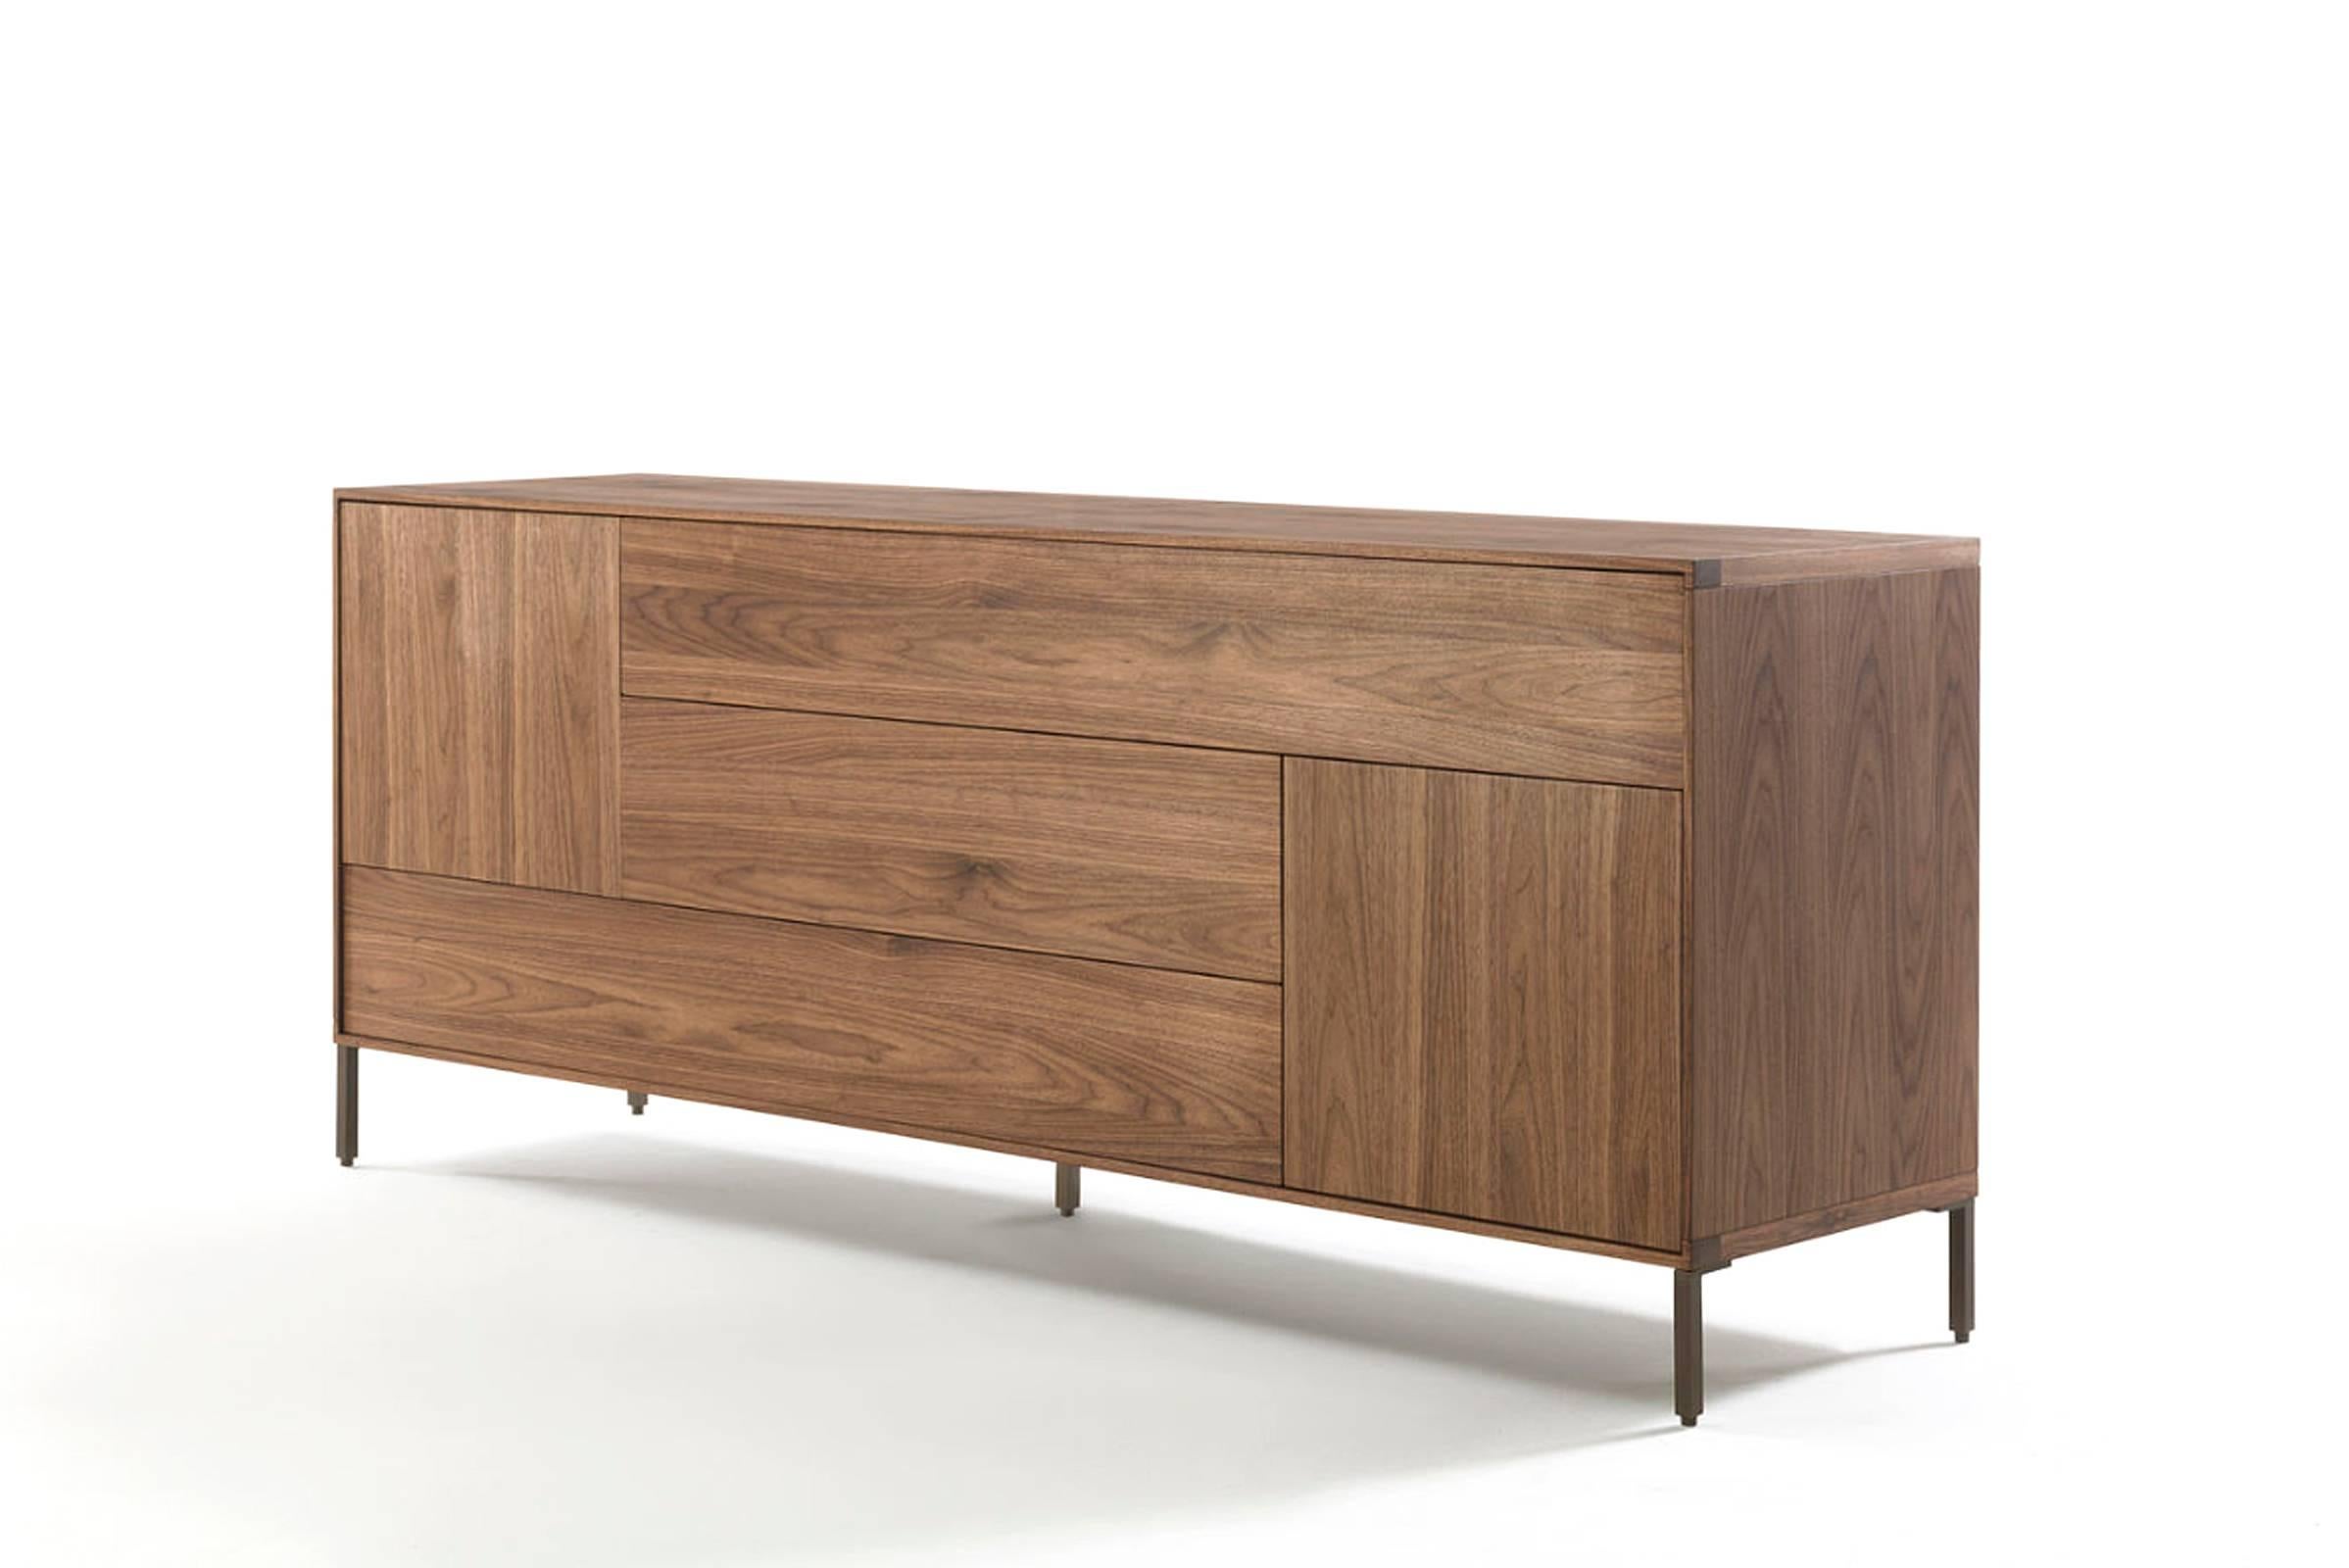 Sideboard Barbara in massive natural walnut with
three drawers and two doors. Opening with push-pull system.
Available in cherrywood, maple or oak, price: 10700,00€.
